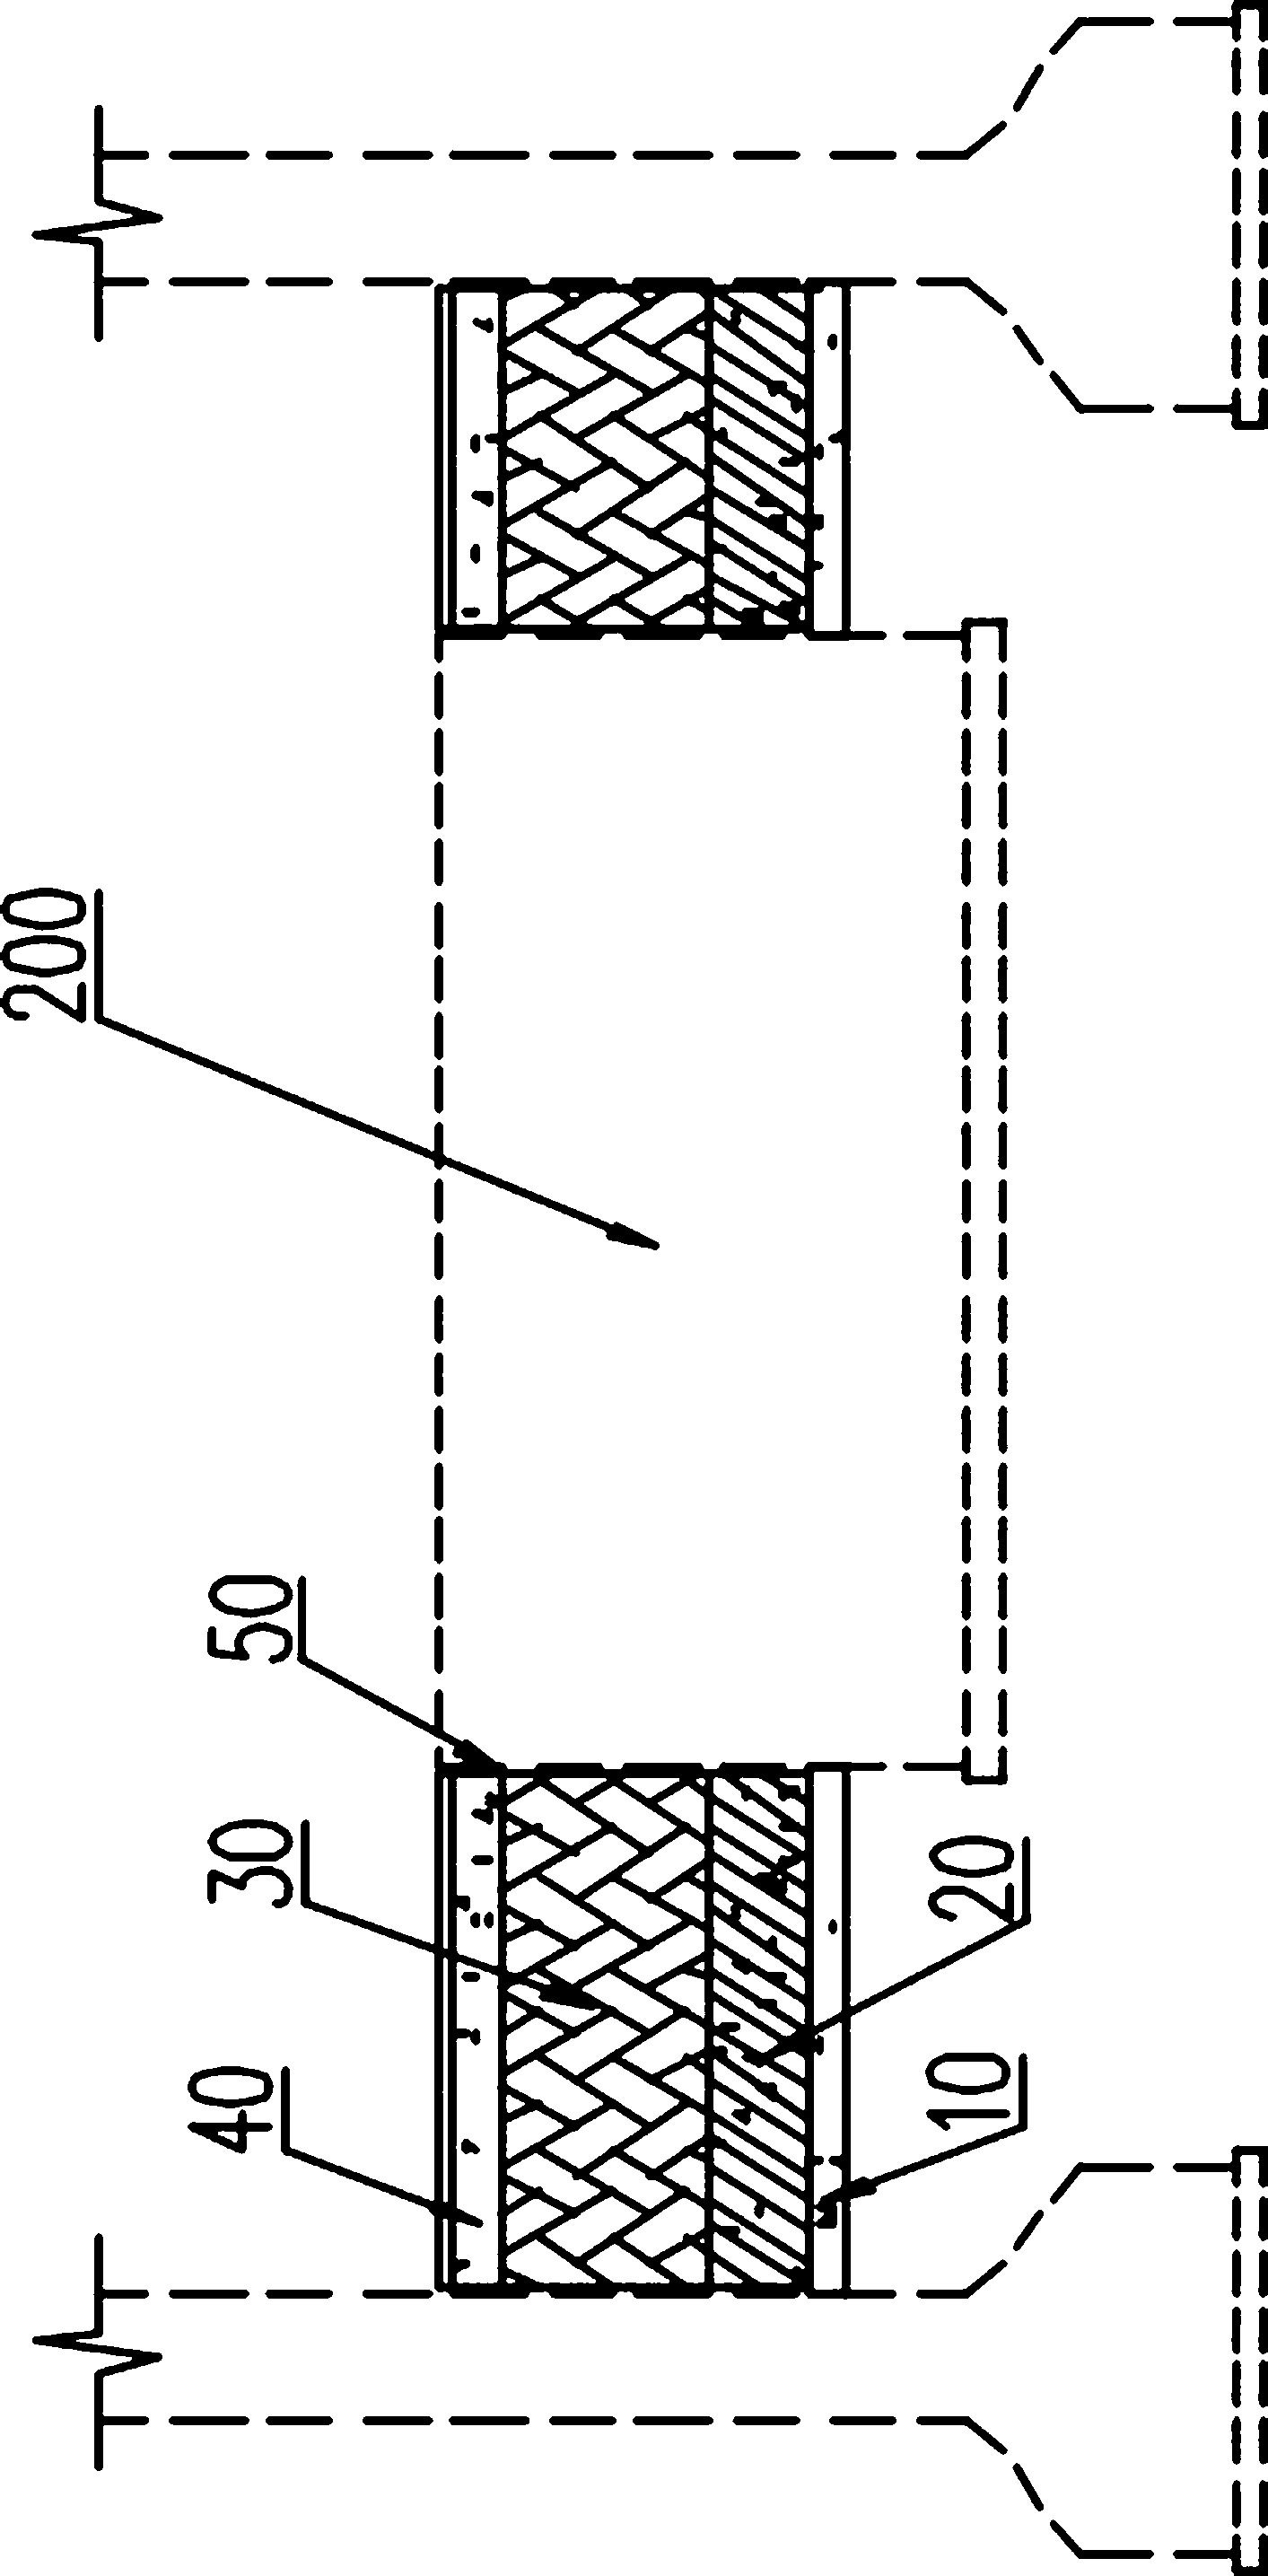 Structure of apparatus and buttress integrated foundation in steam turbine room